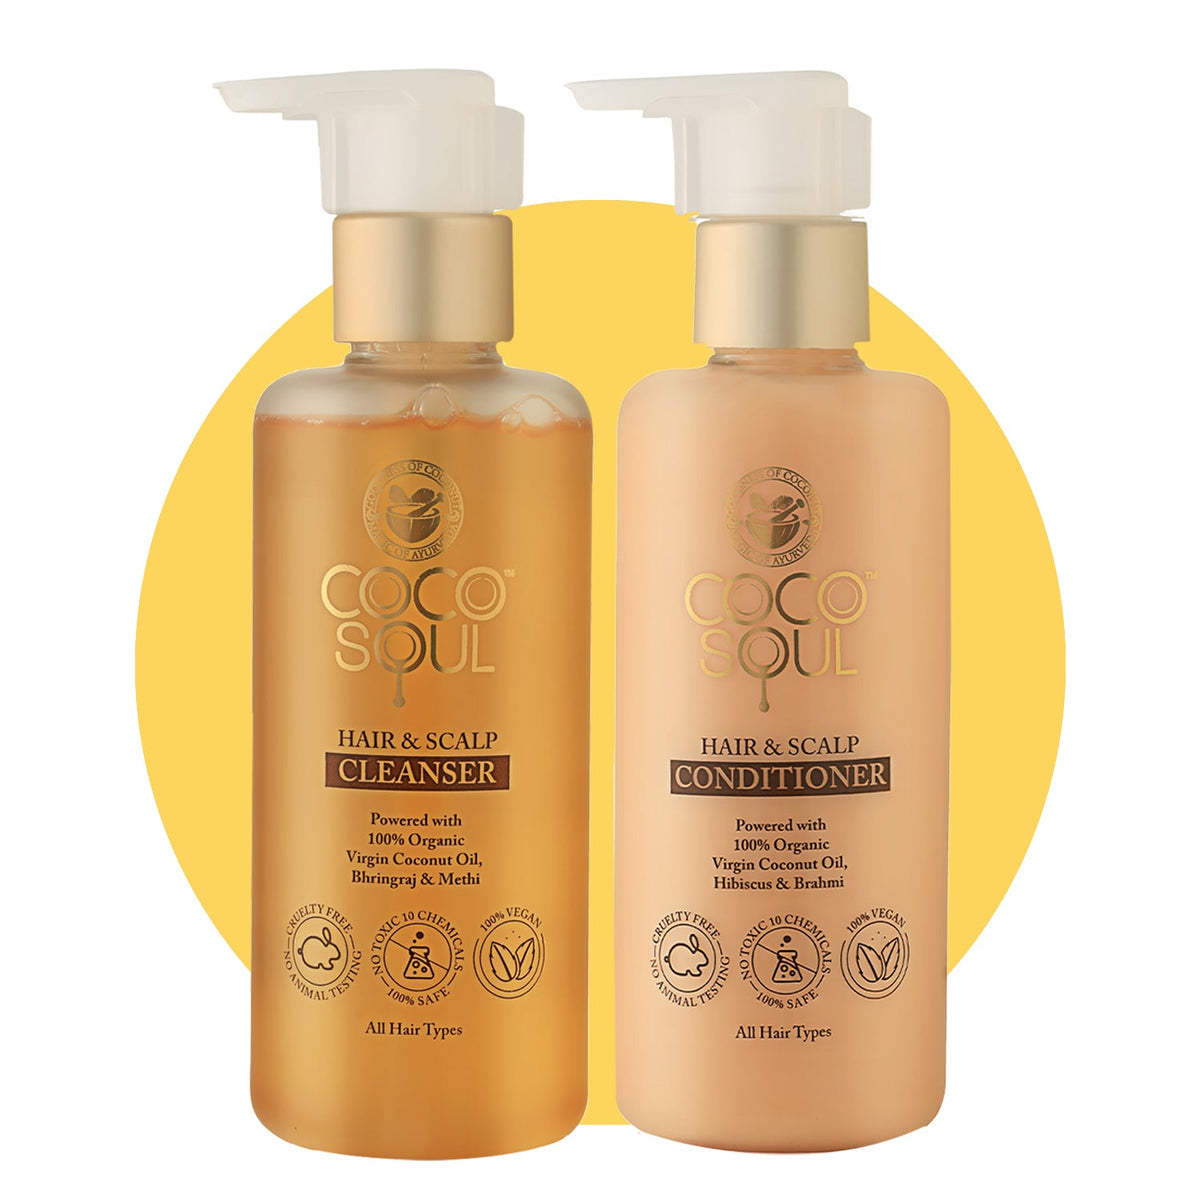 [CRED] Hair Care Combo - Shampoo 200ml + Conditioner 200ml | 400ml